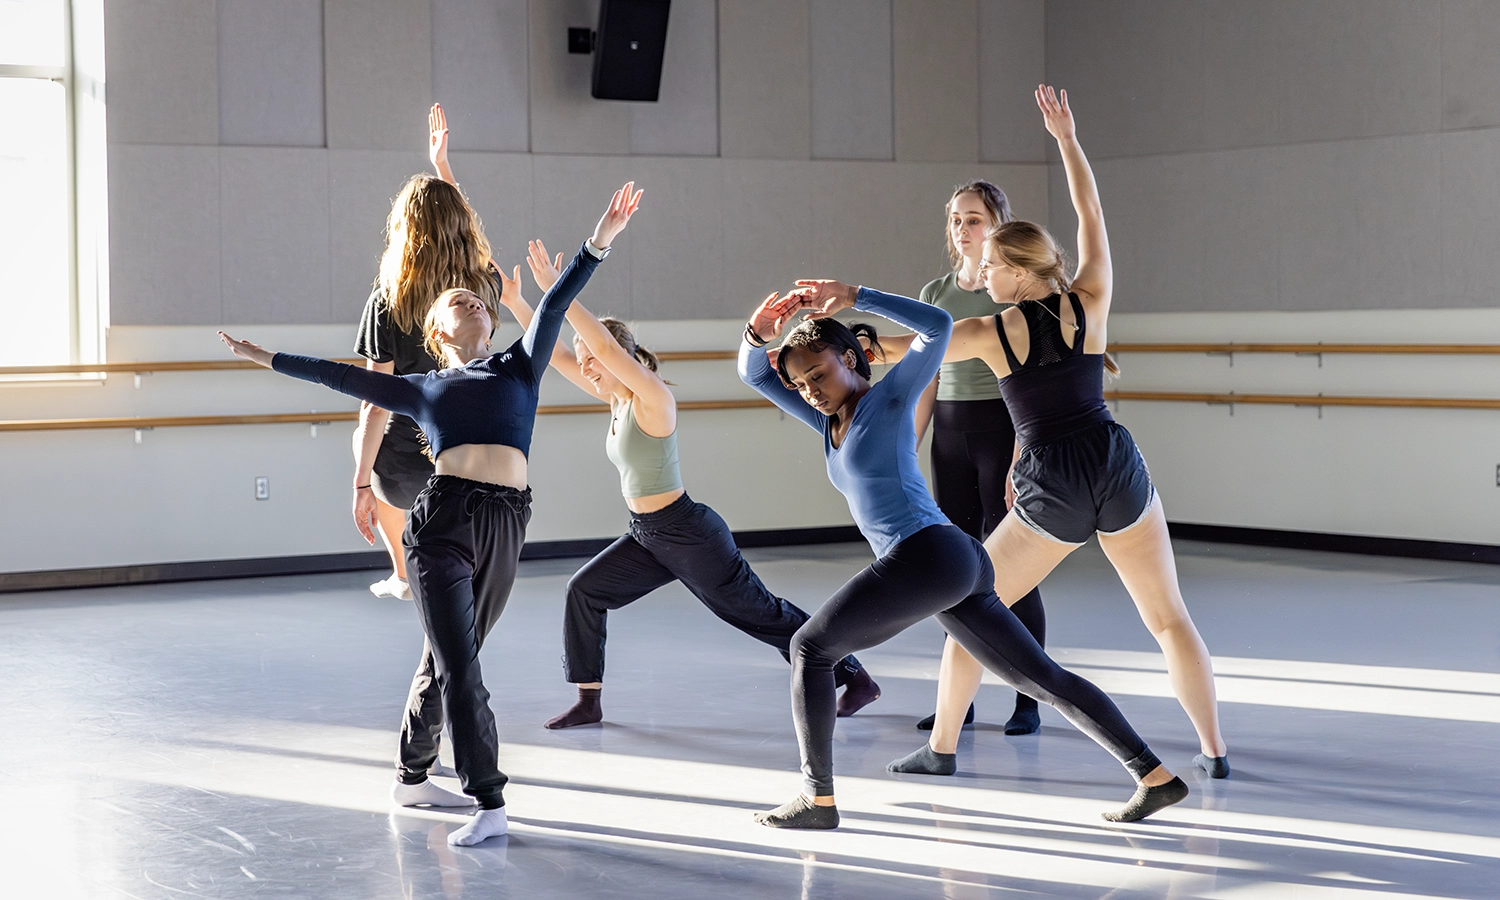 Students in Associate Professor of Dance and Movement Studies Michelle Ikle’s Dance Ensemble rehearse in preparation for the Faculty Dance Concert in April.